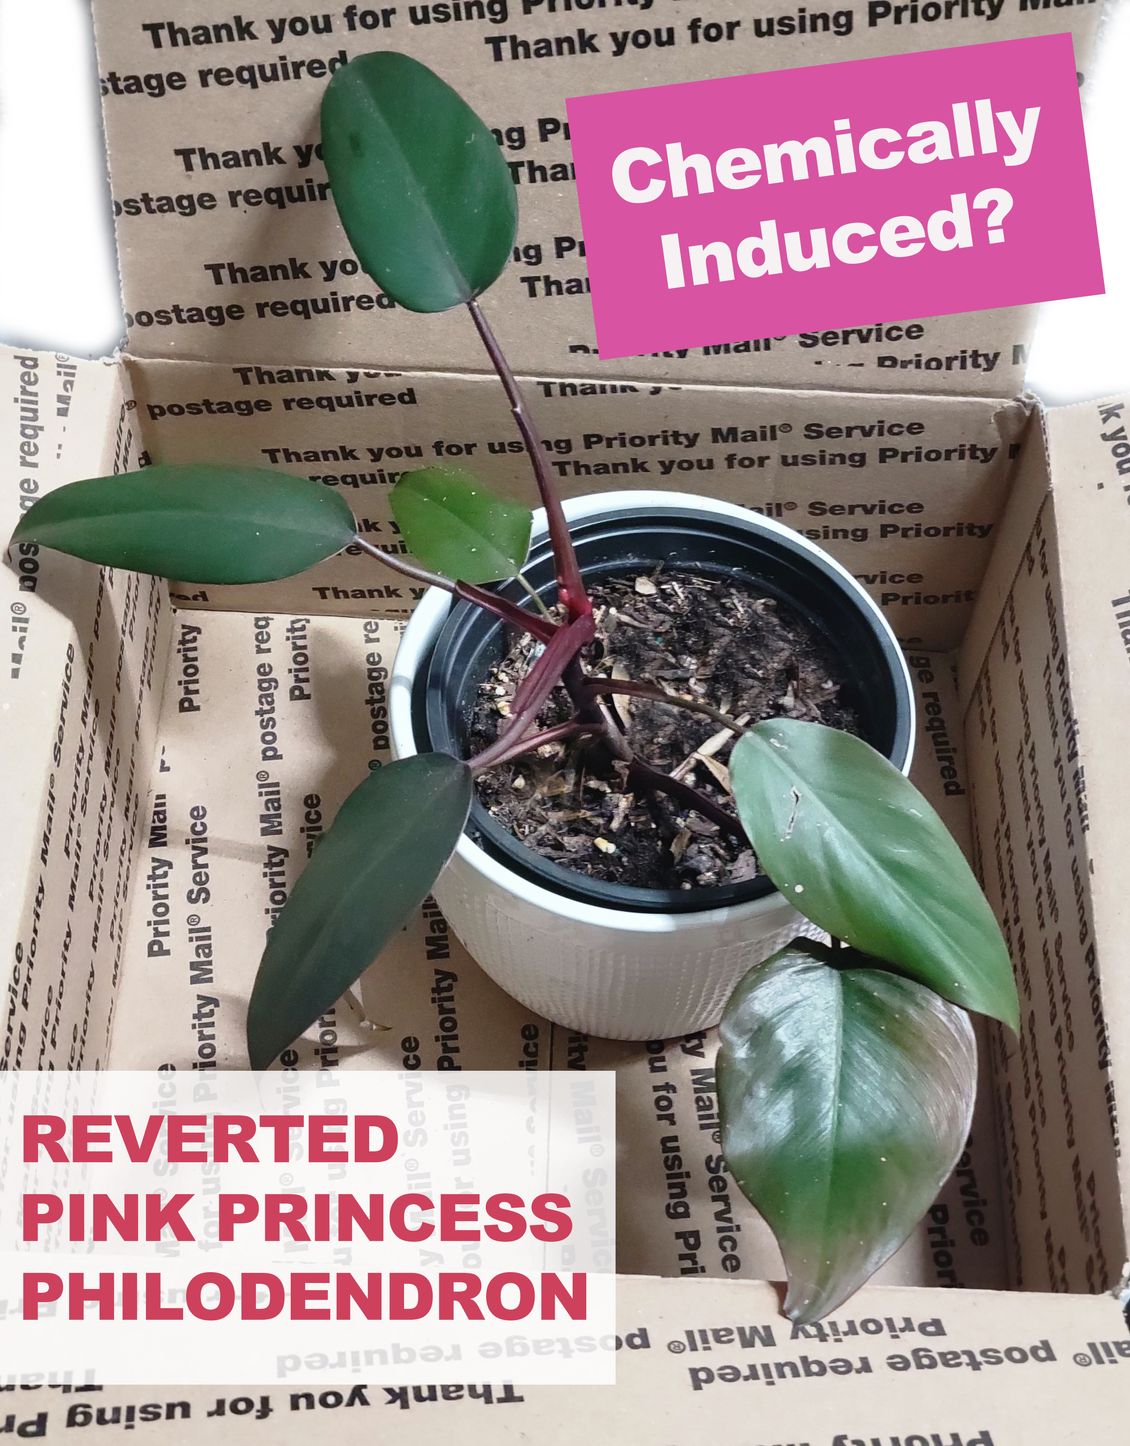 Why Pink Princess Philodendron is Likely a Chemically Induced Plant